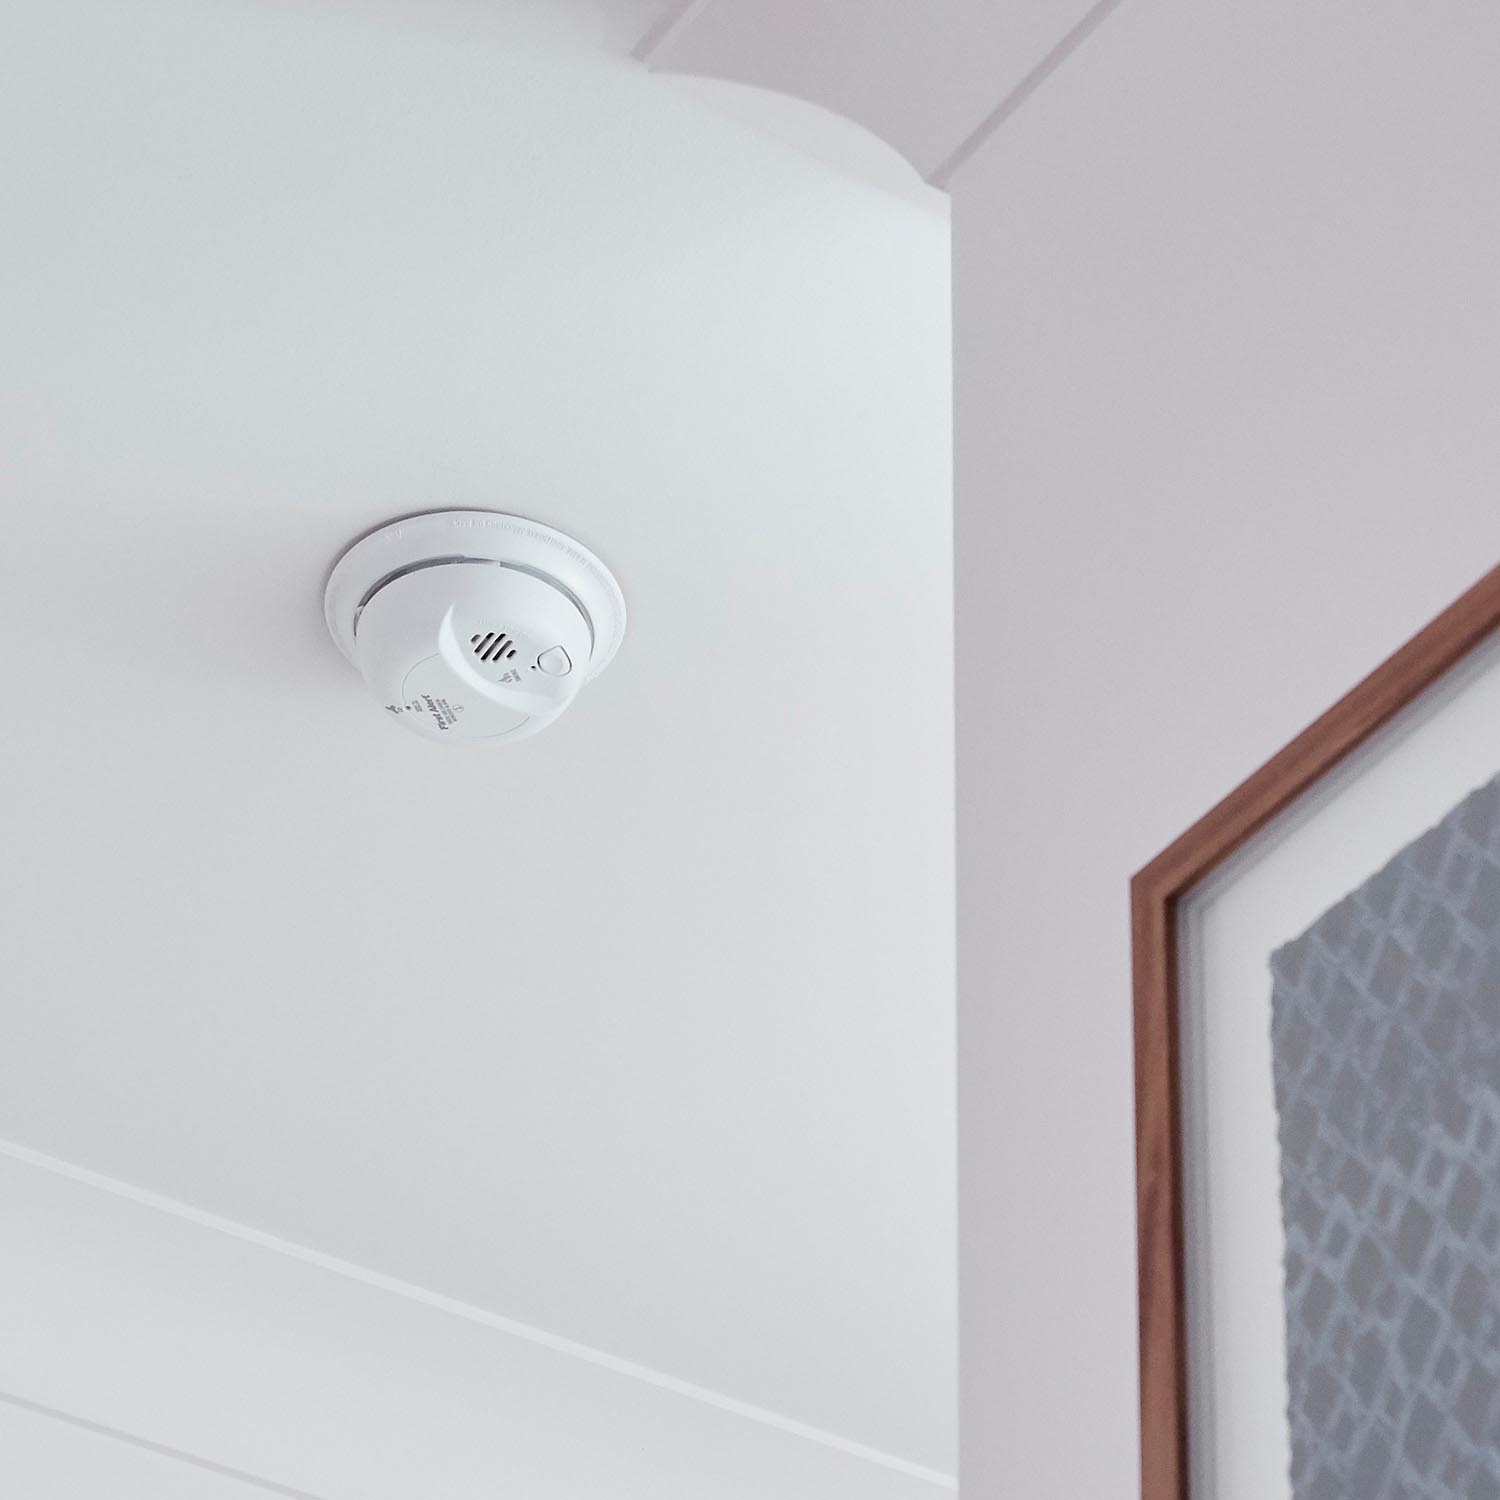 Ensure Your Smoke & CO alarm is compliant with current Laws